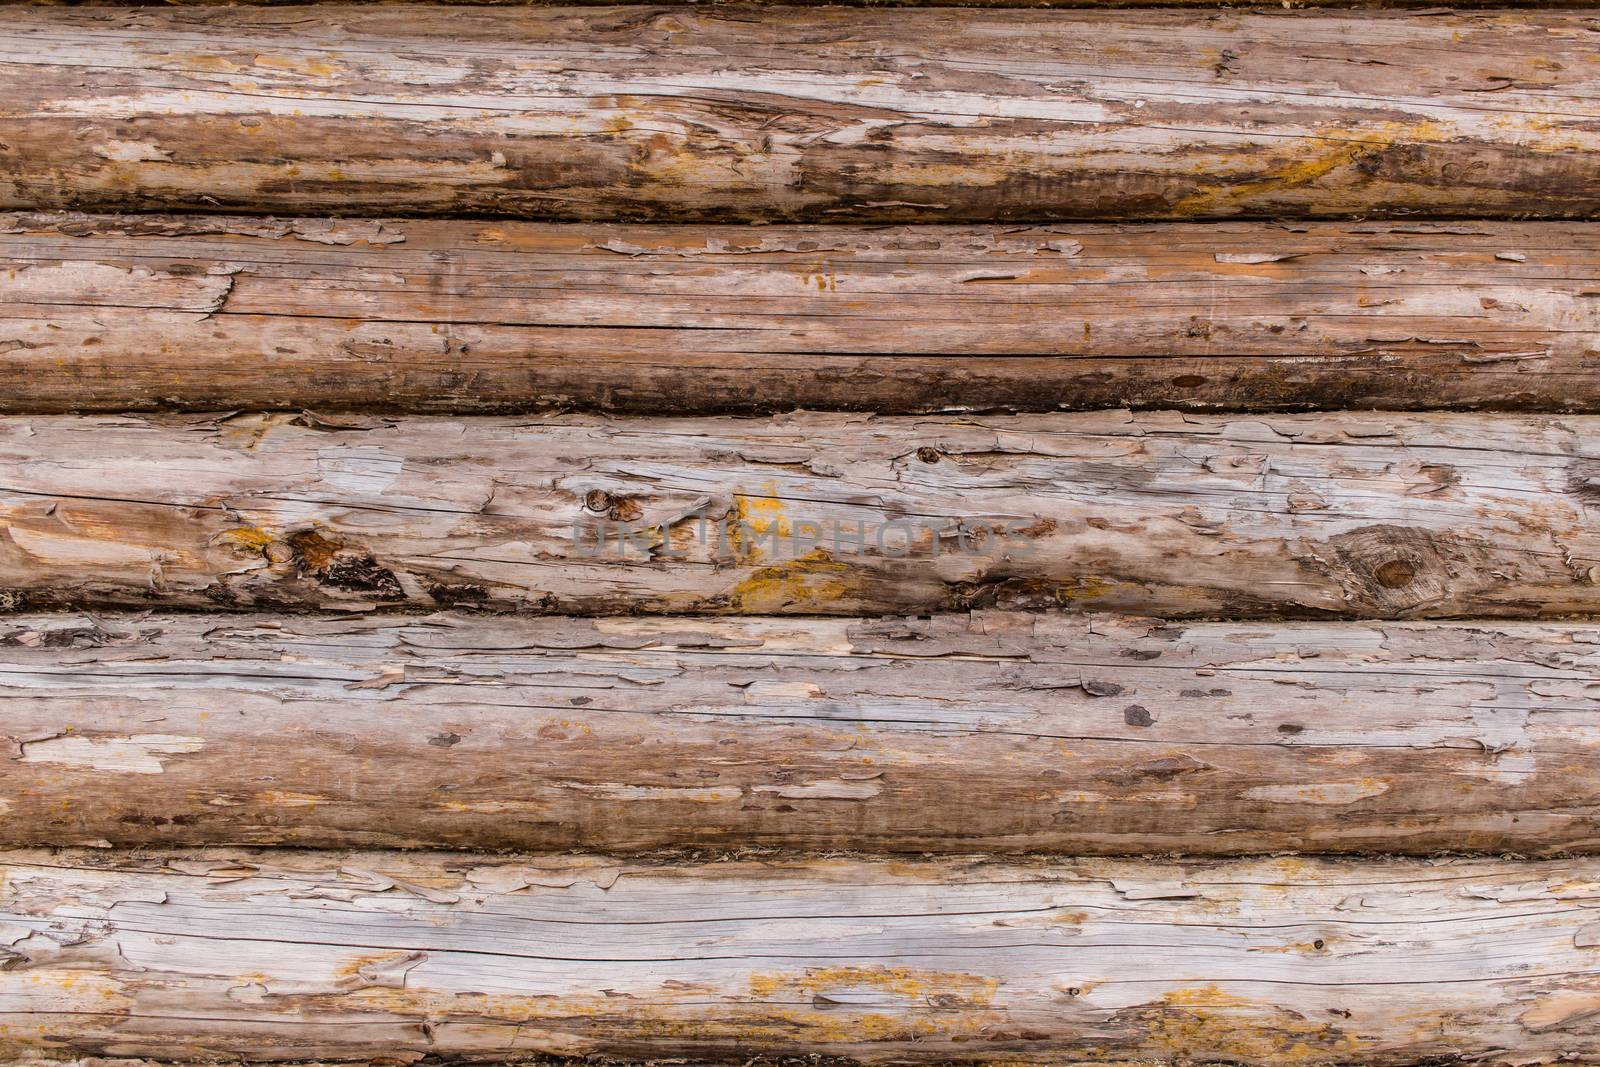 Fragment of the rustic wooden house cracked log wall. Rural house log wall background texture.